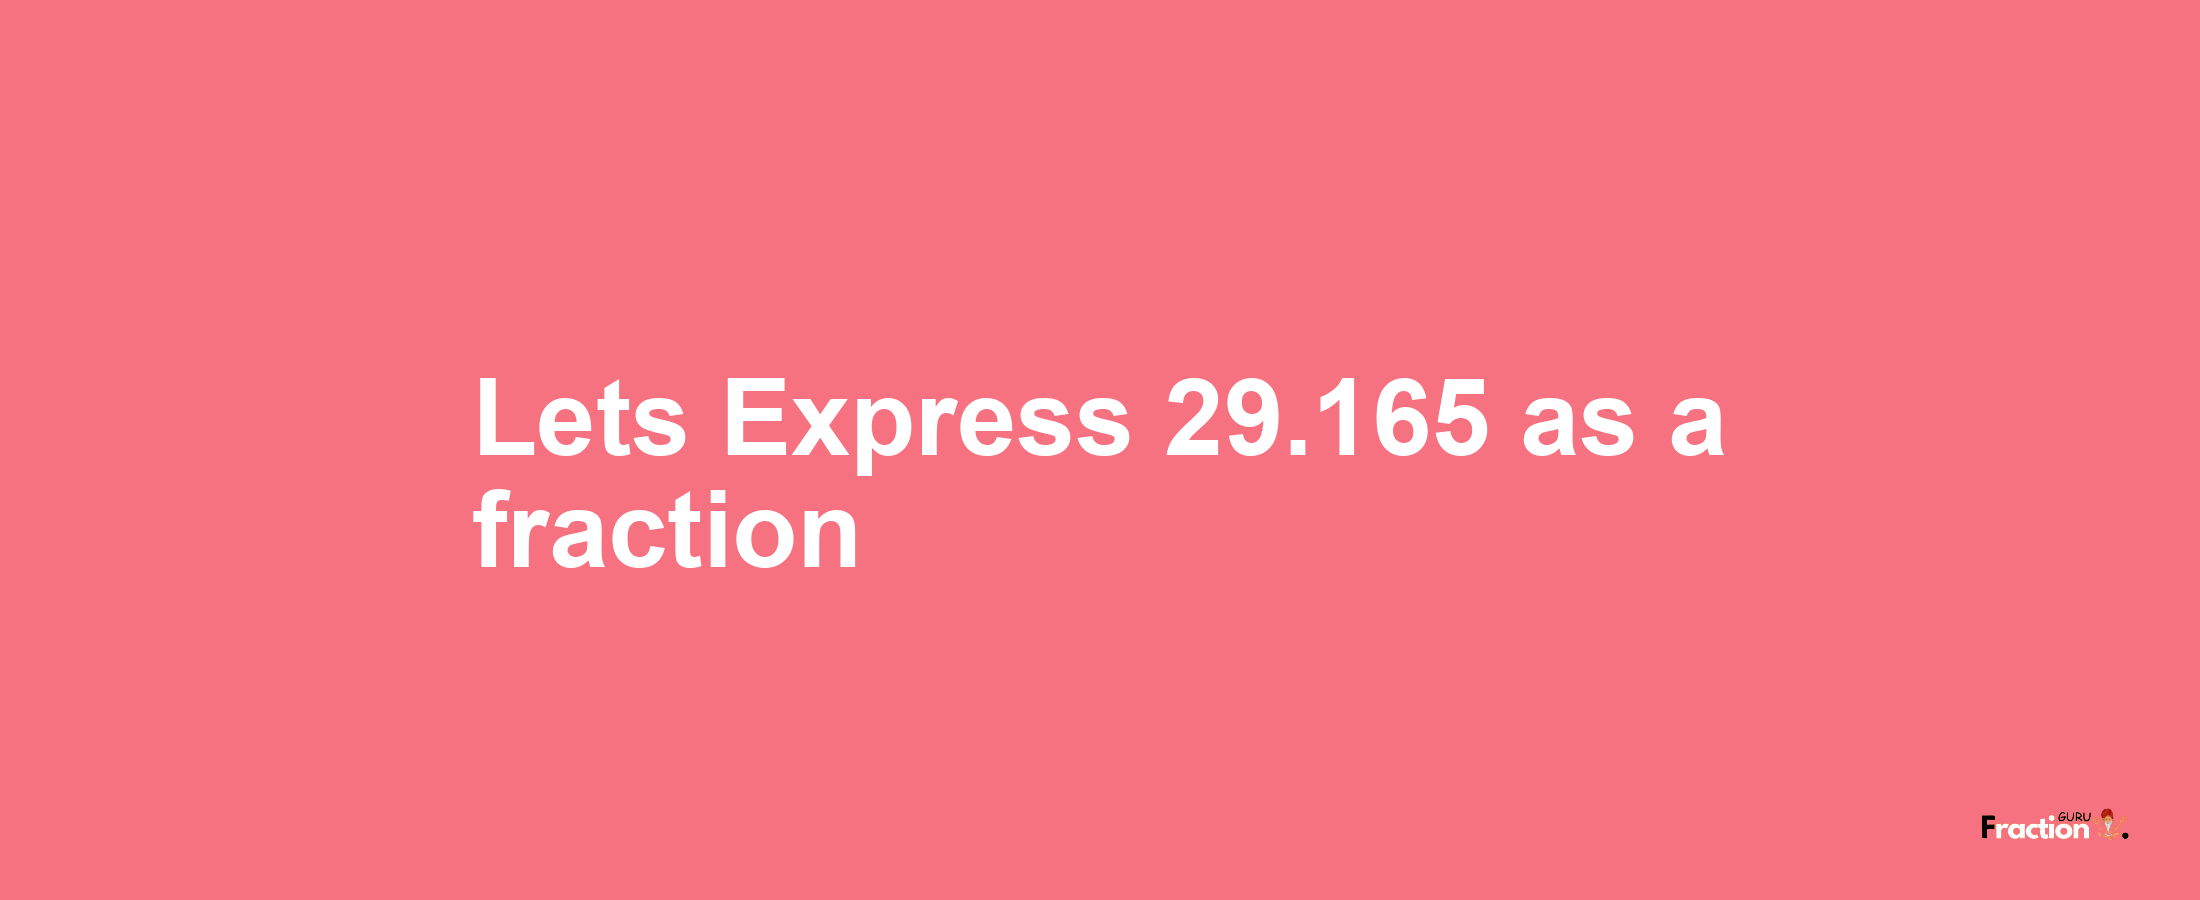 Lets Express 29.165 as afraction